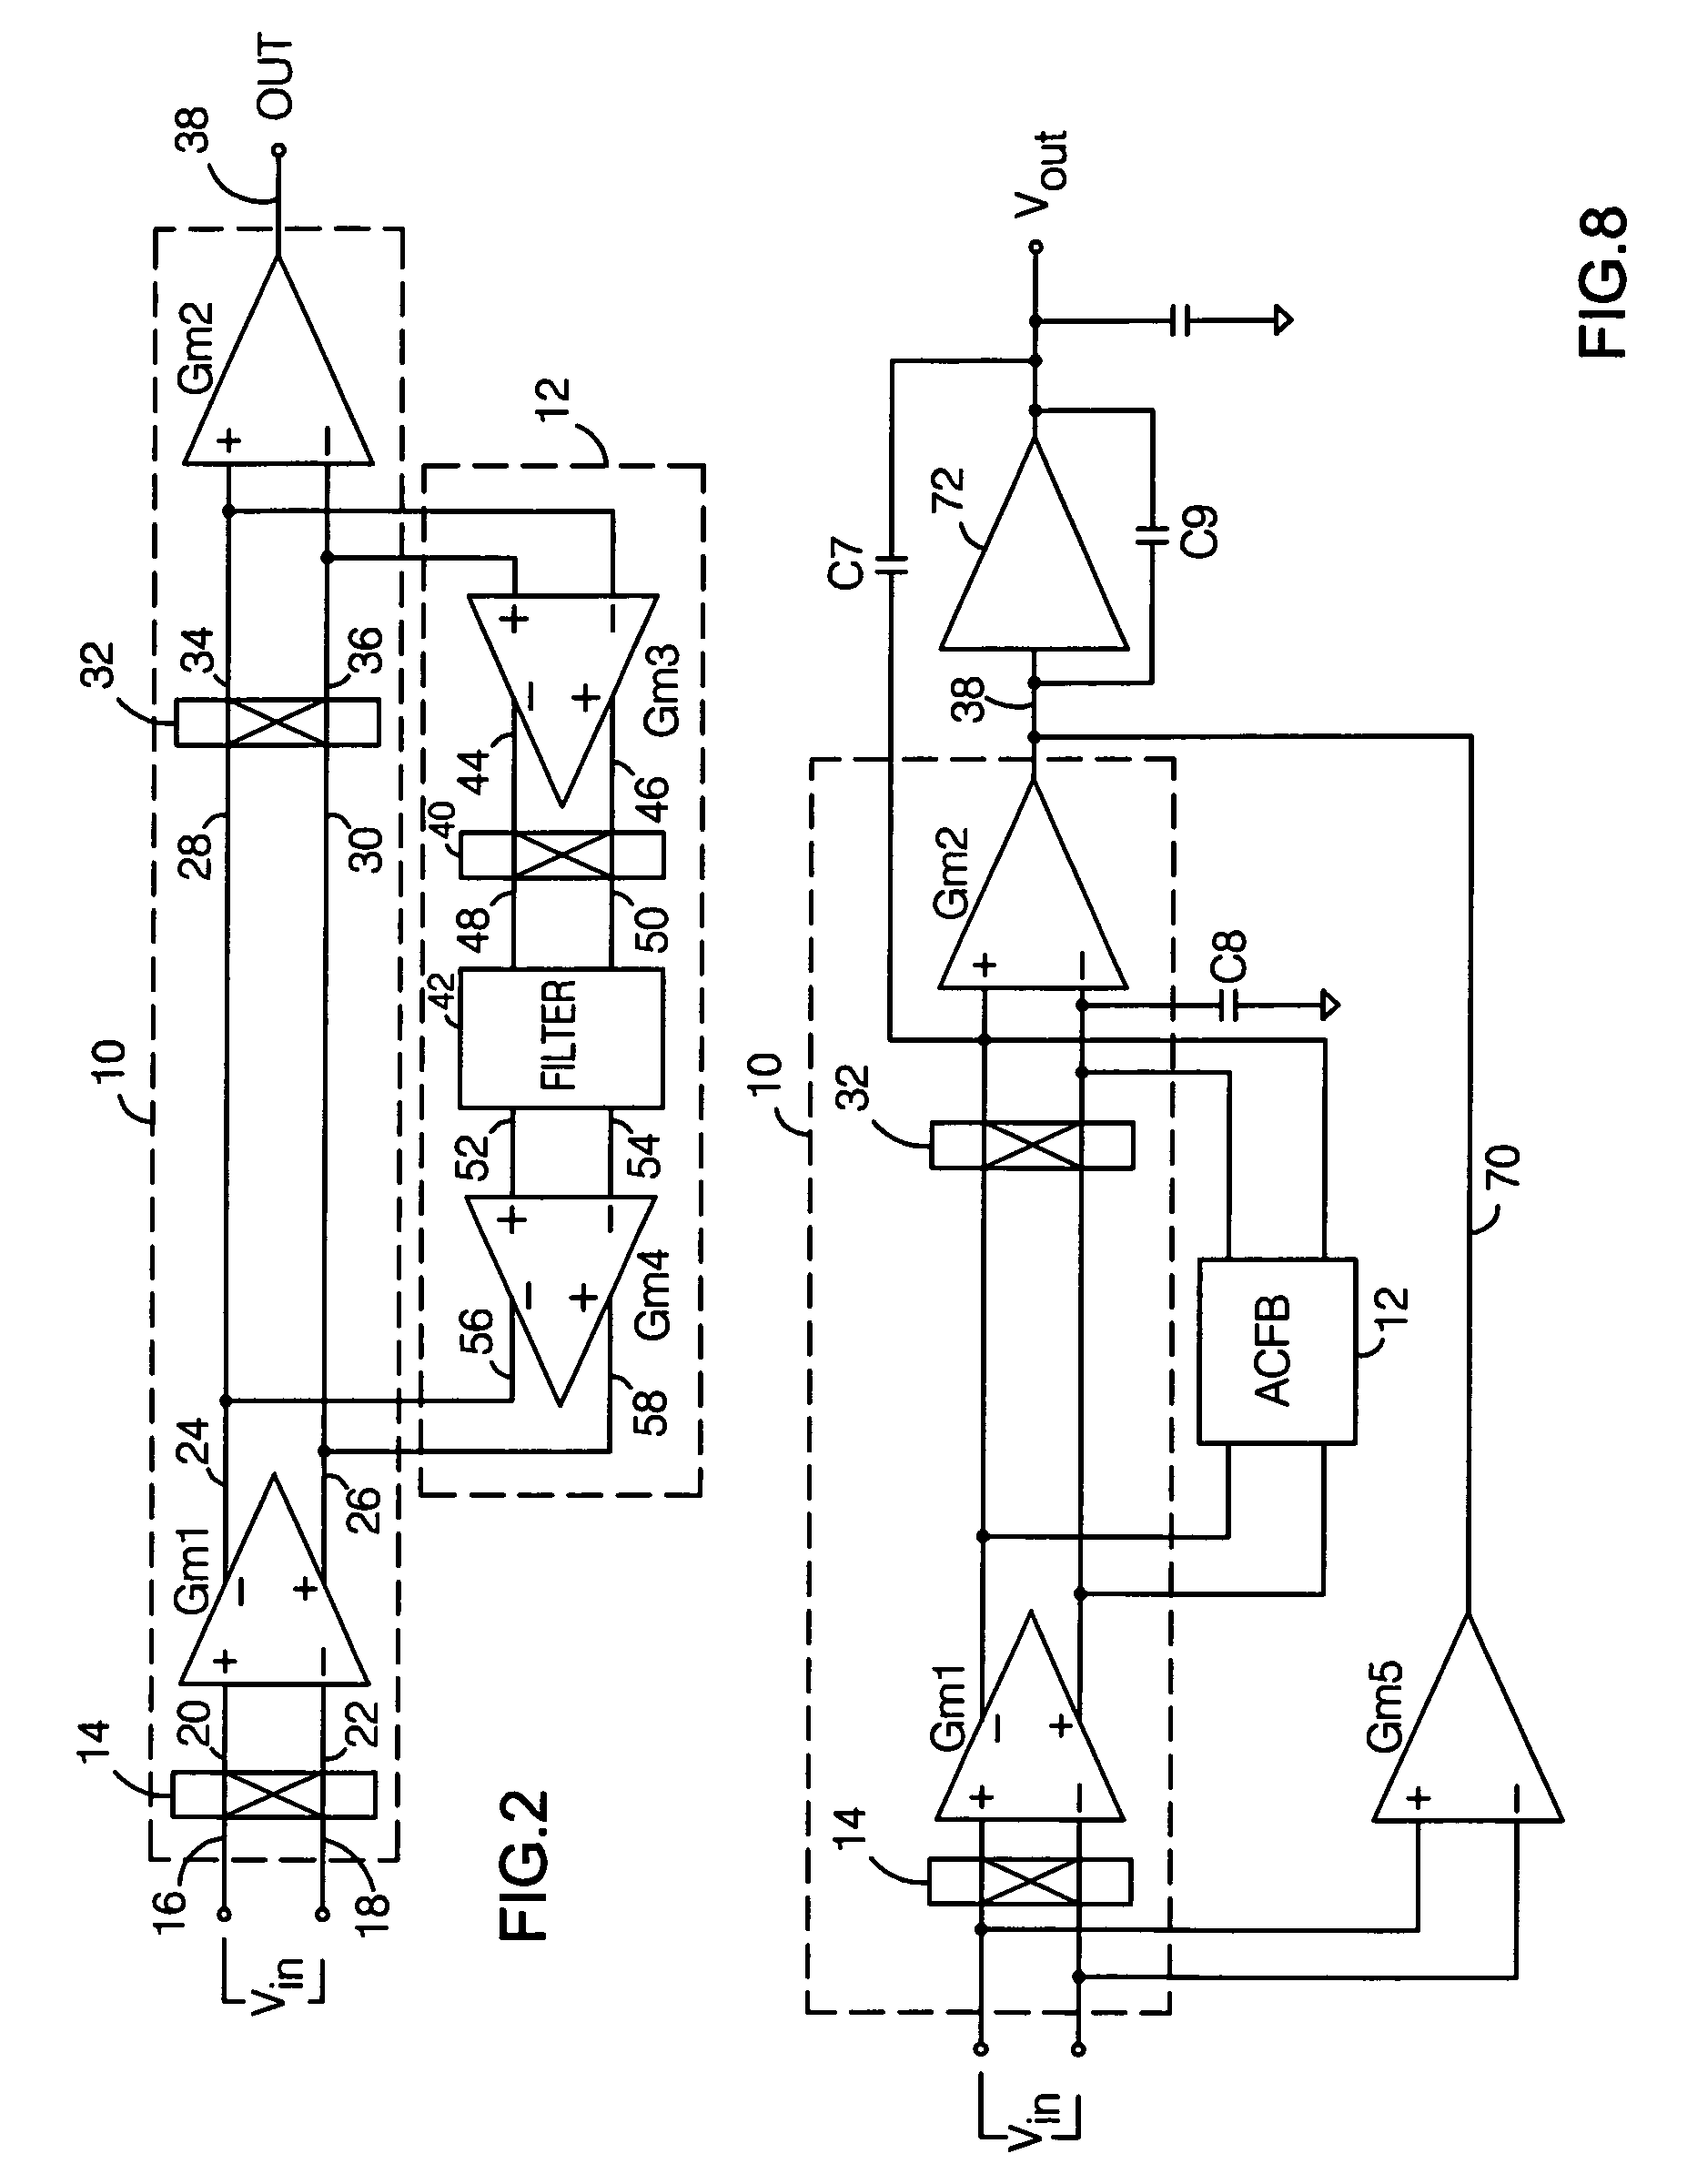 Auto-correction feedback loop for offset and ripple suppression in a chopper-stabilized amplifier